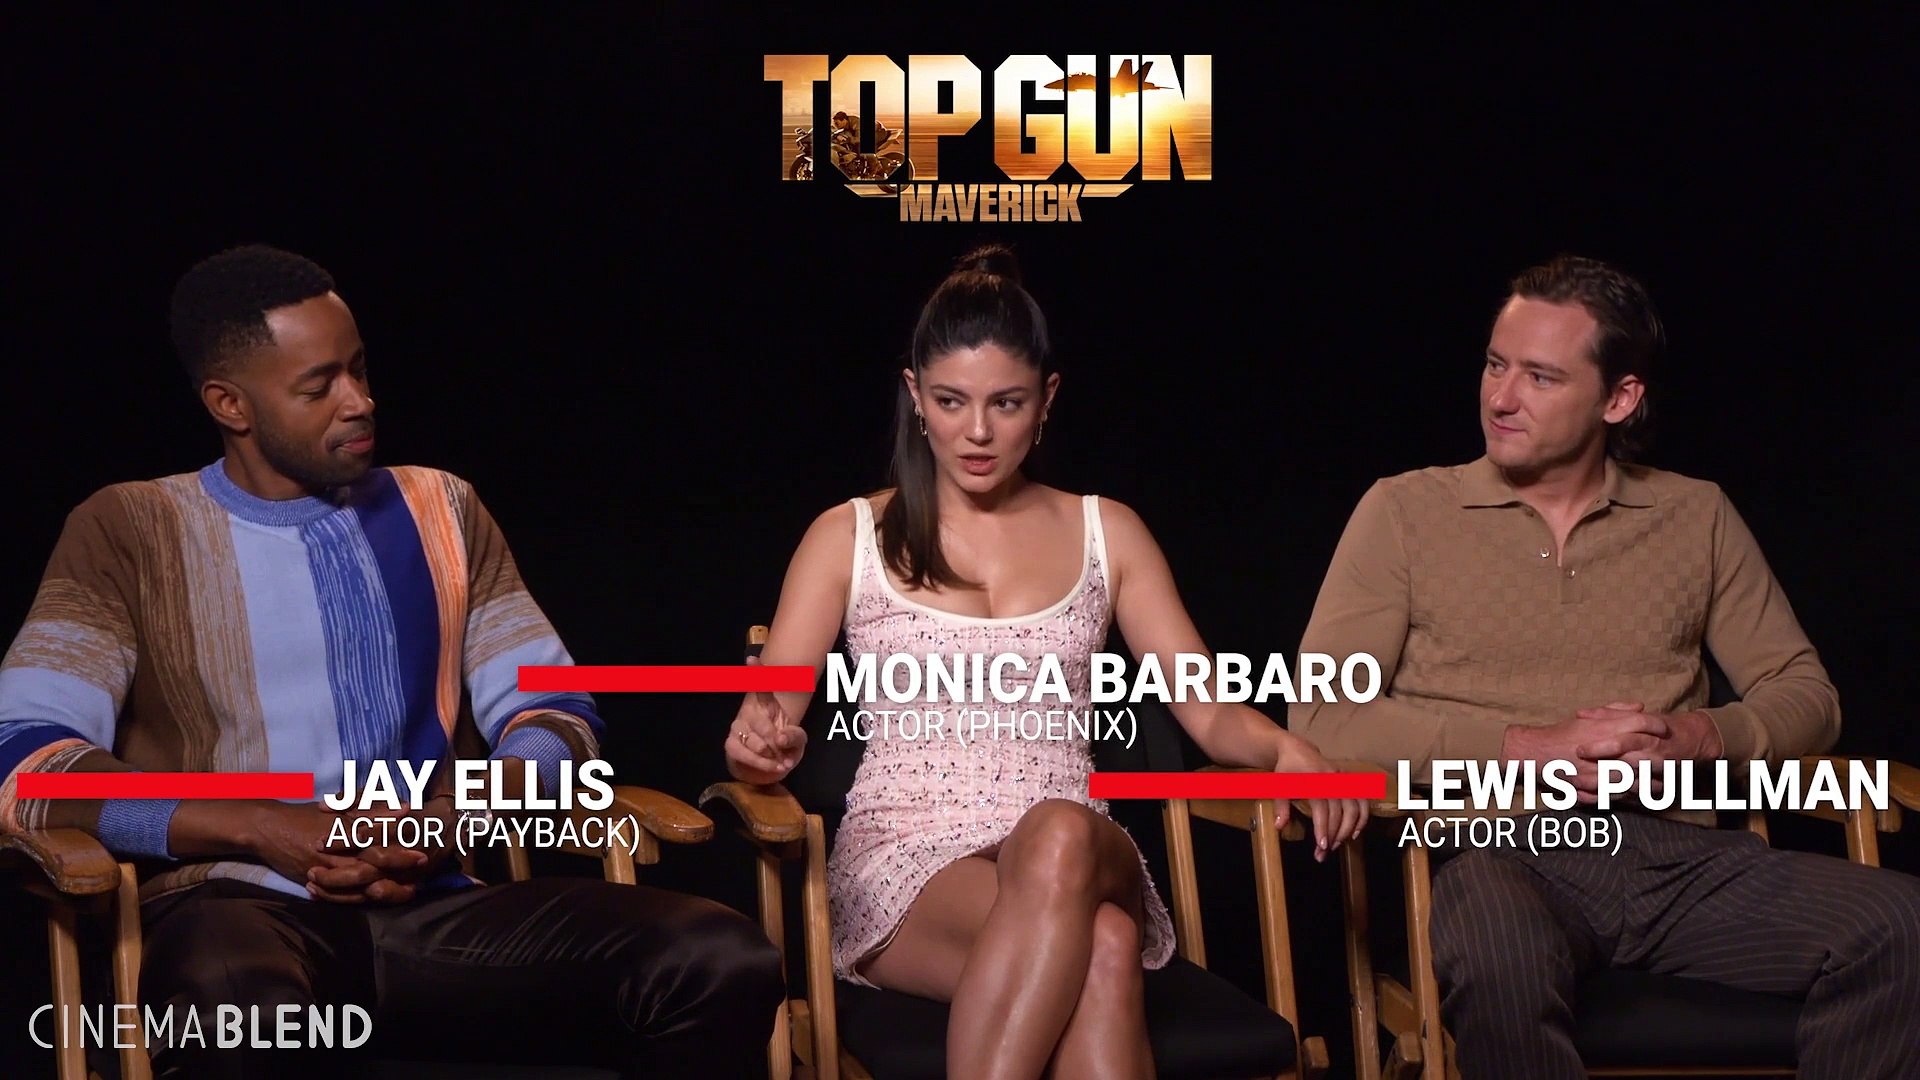 The Actors Who Played Coyote and Fanboy Describe How 'Top Gun